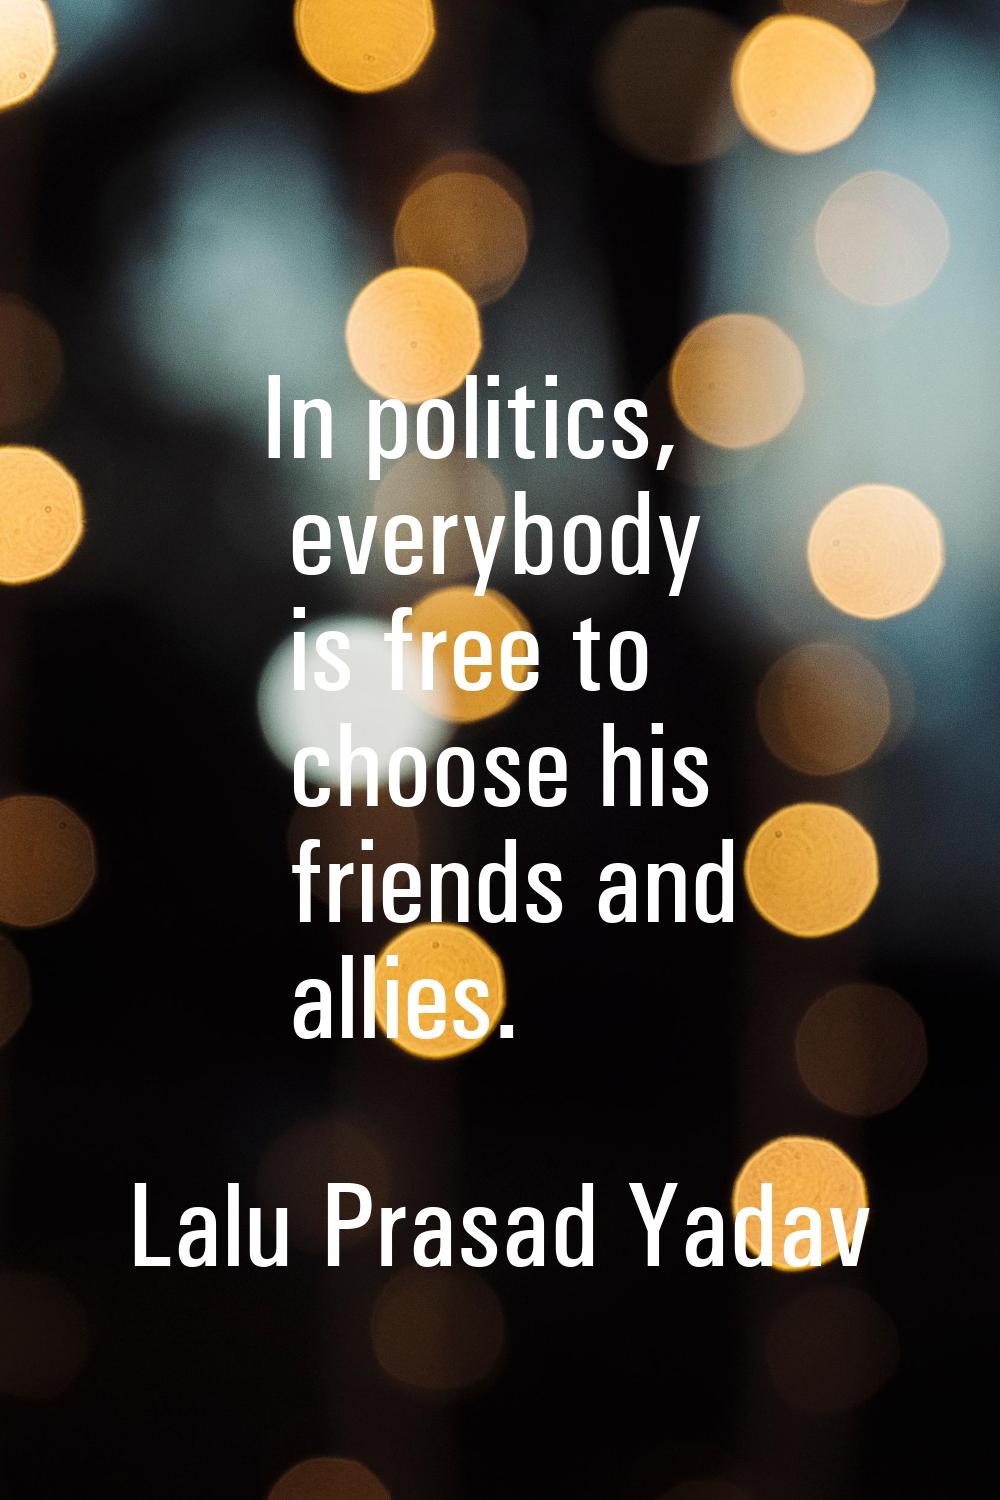 In politics, everybody is free to choose his friends and allies.